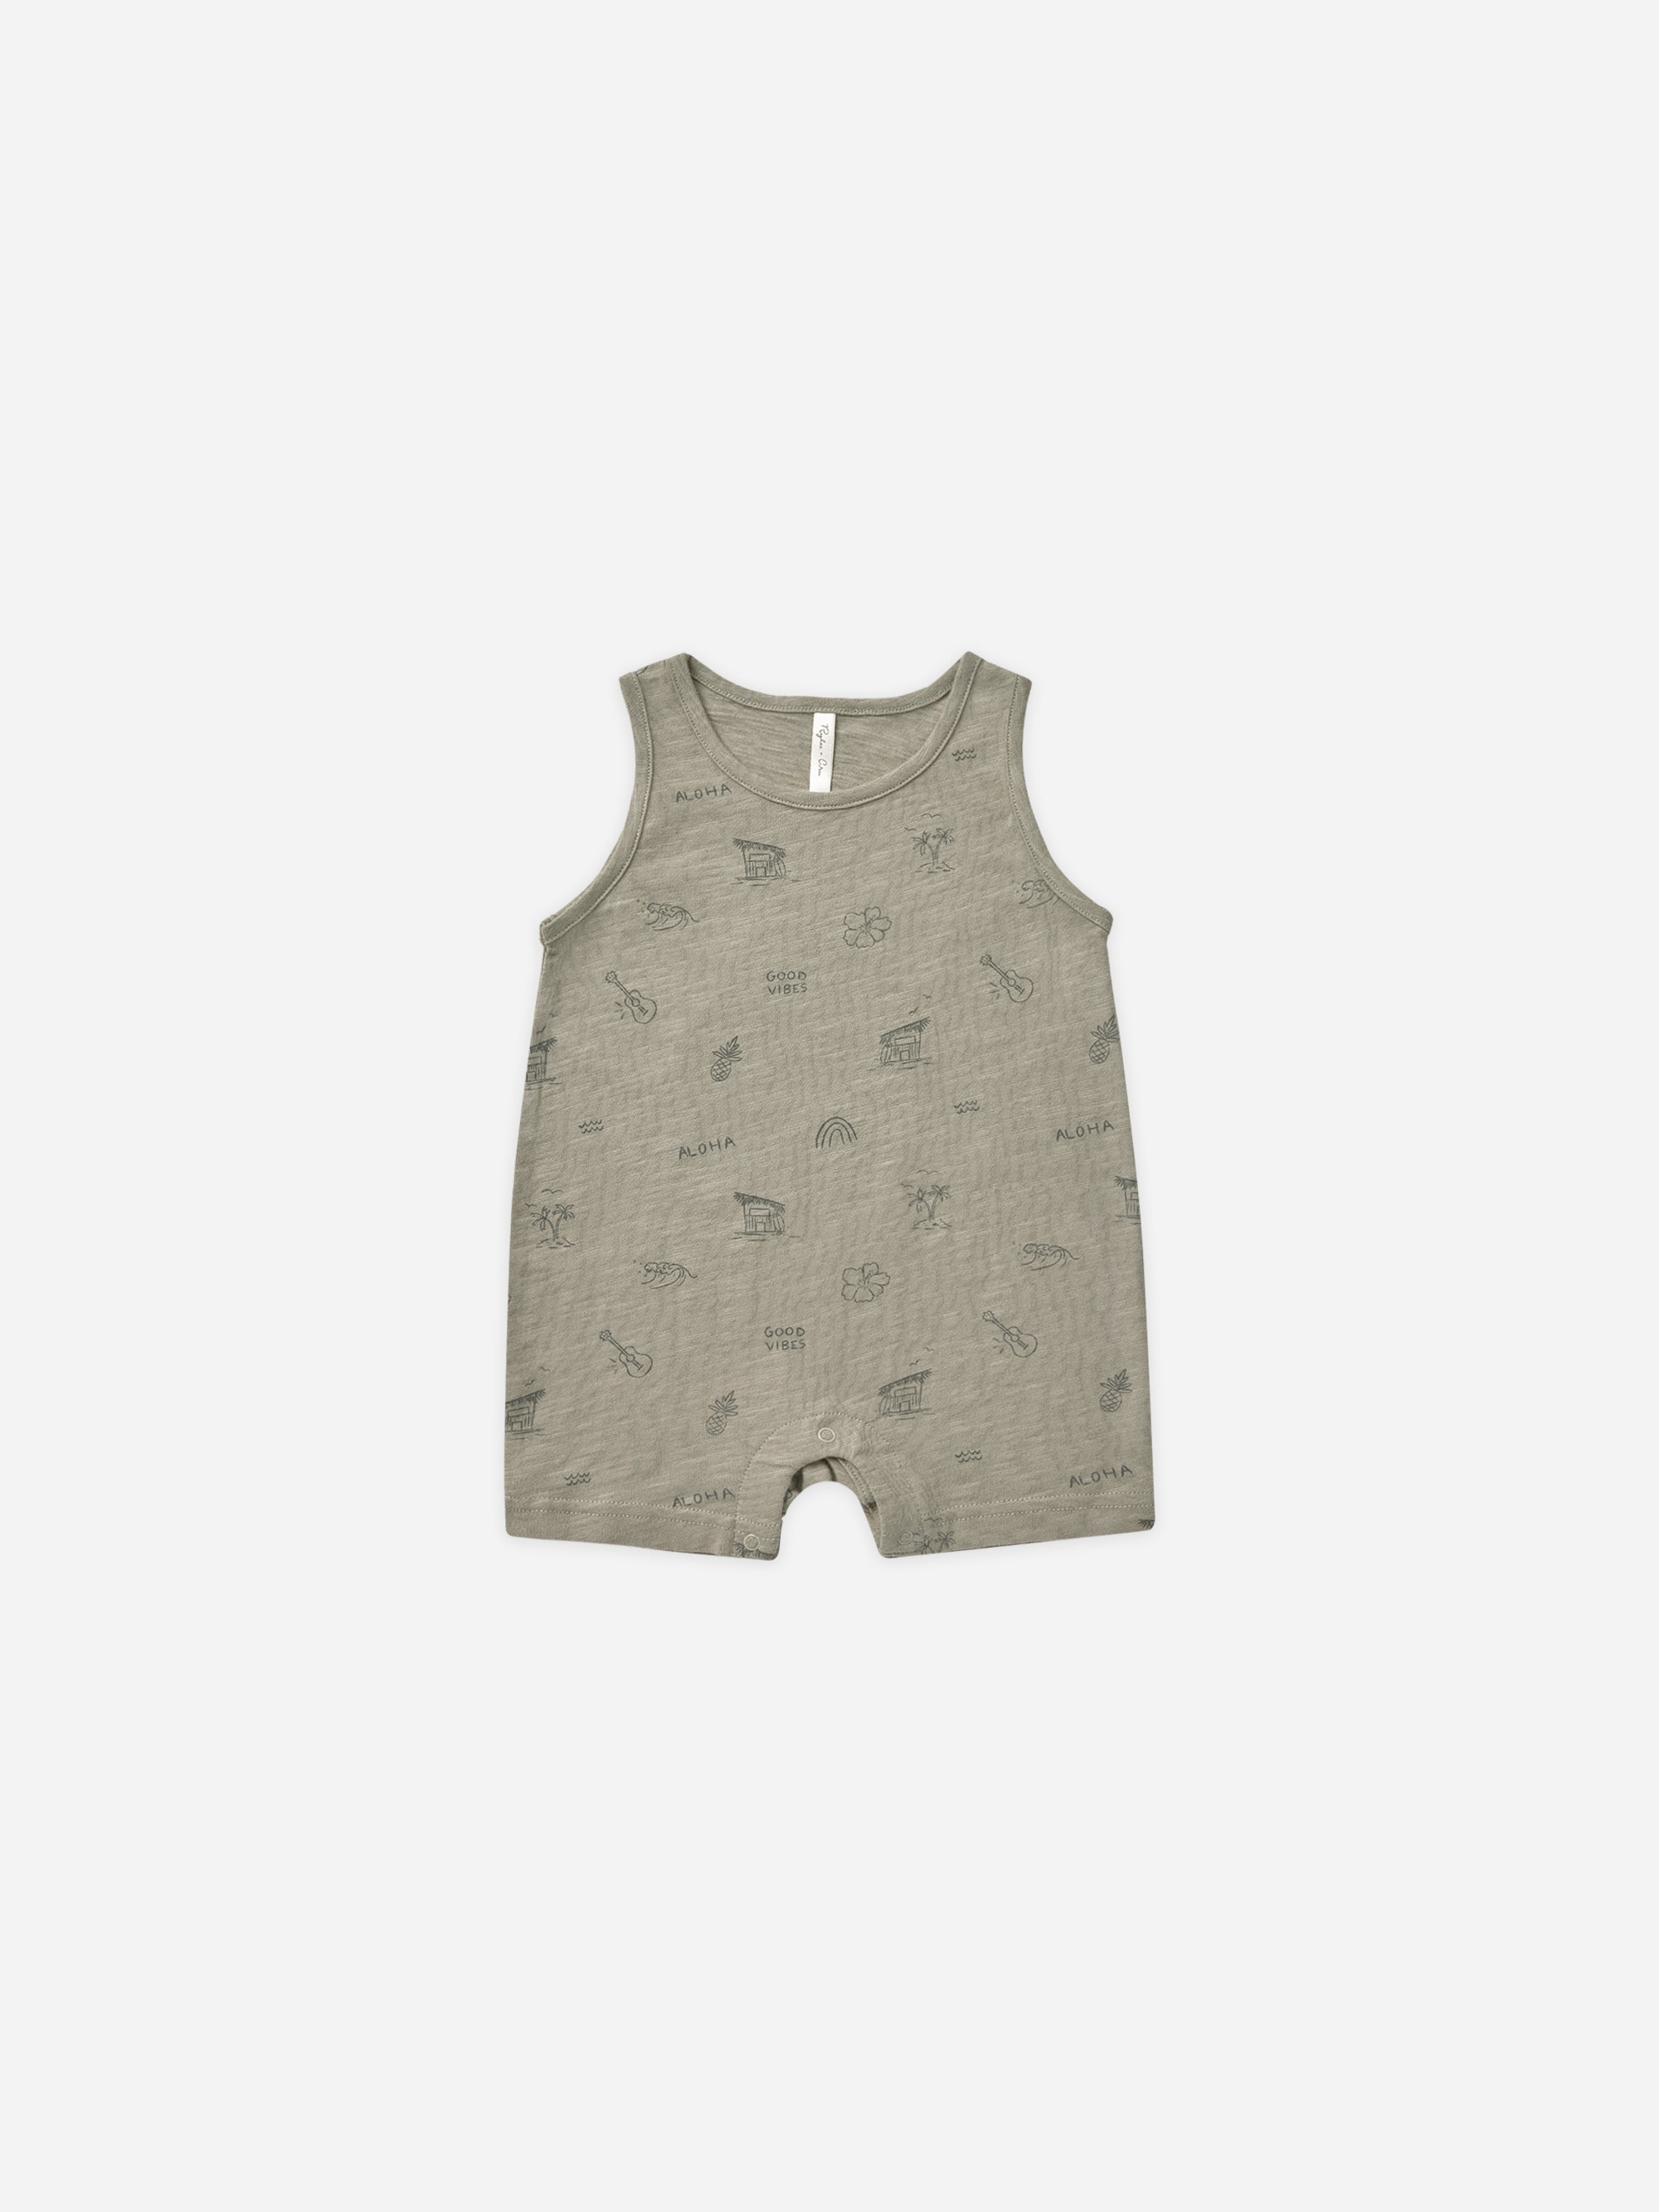 Sleeveless One-Piece || Hawaii - Rylee + Cru | Kids Clothes | Trendy Baby Clothes | Modern Infant Outfits |